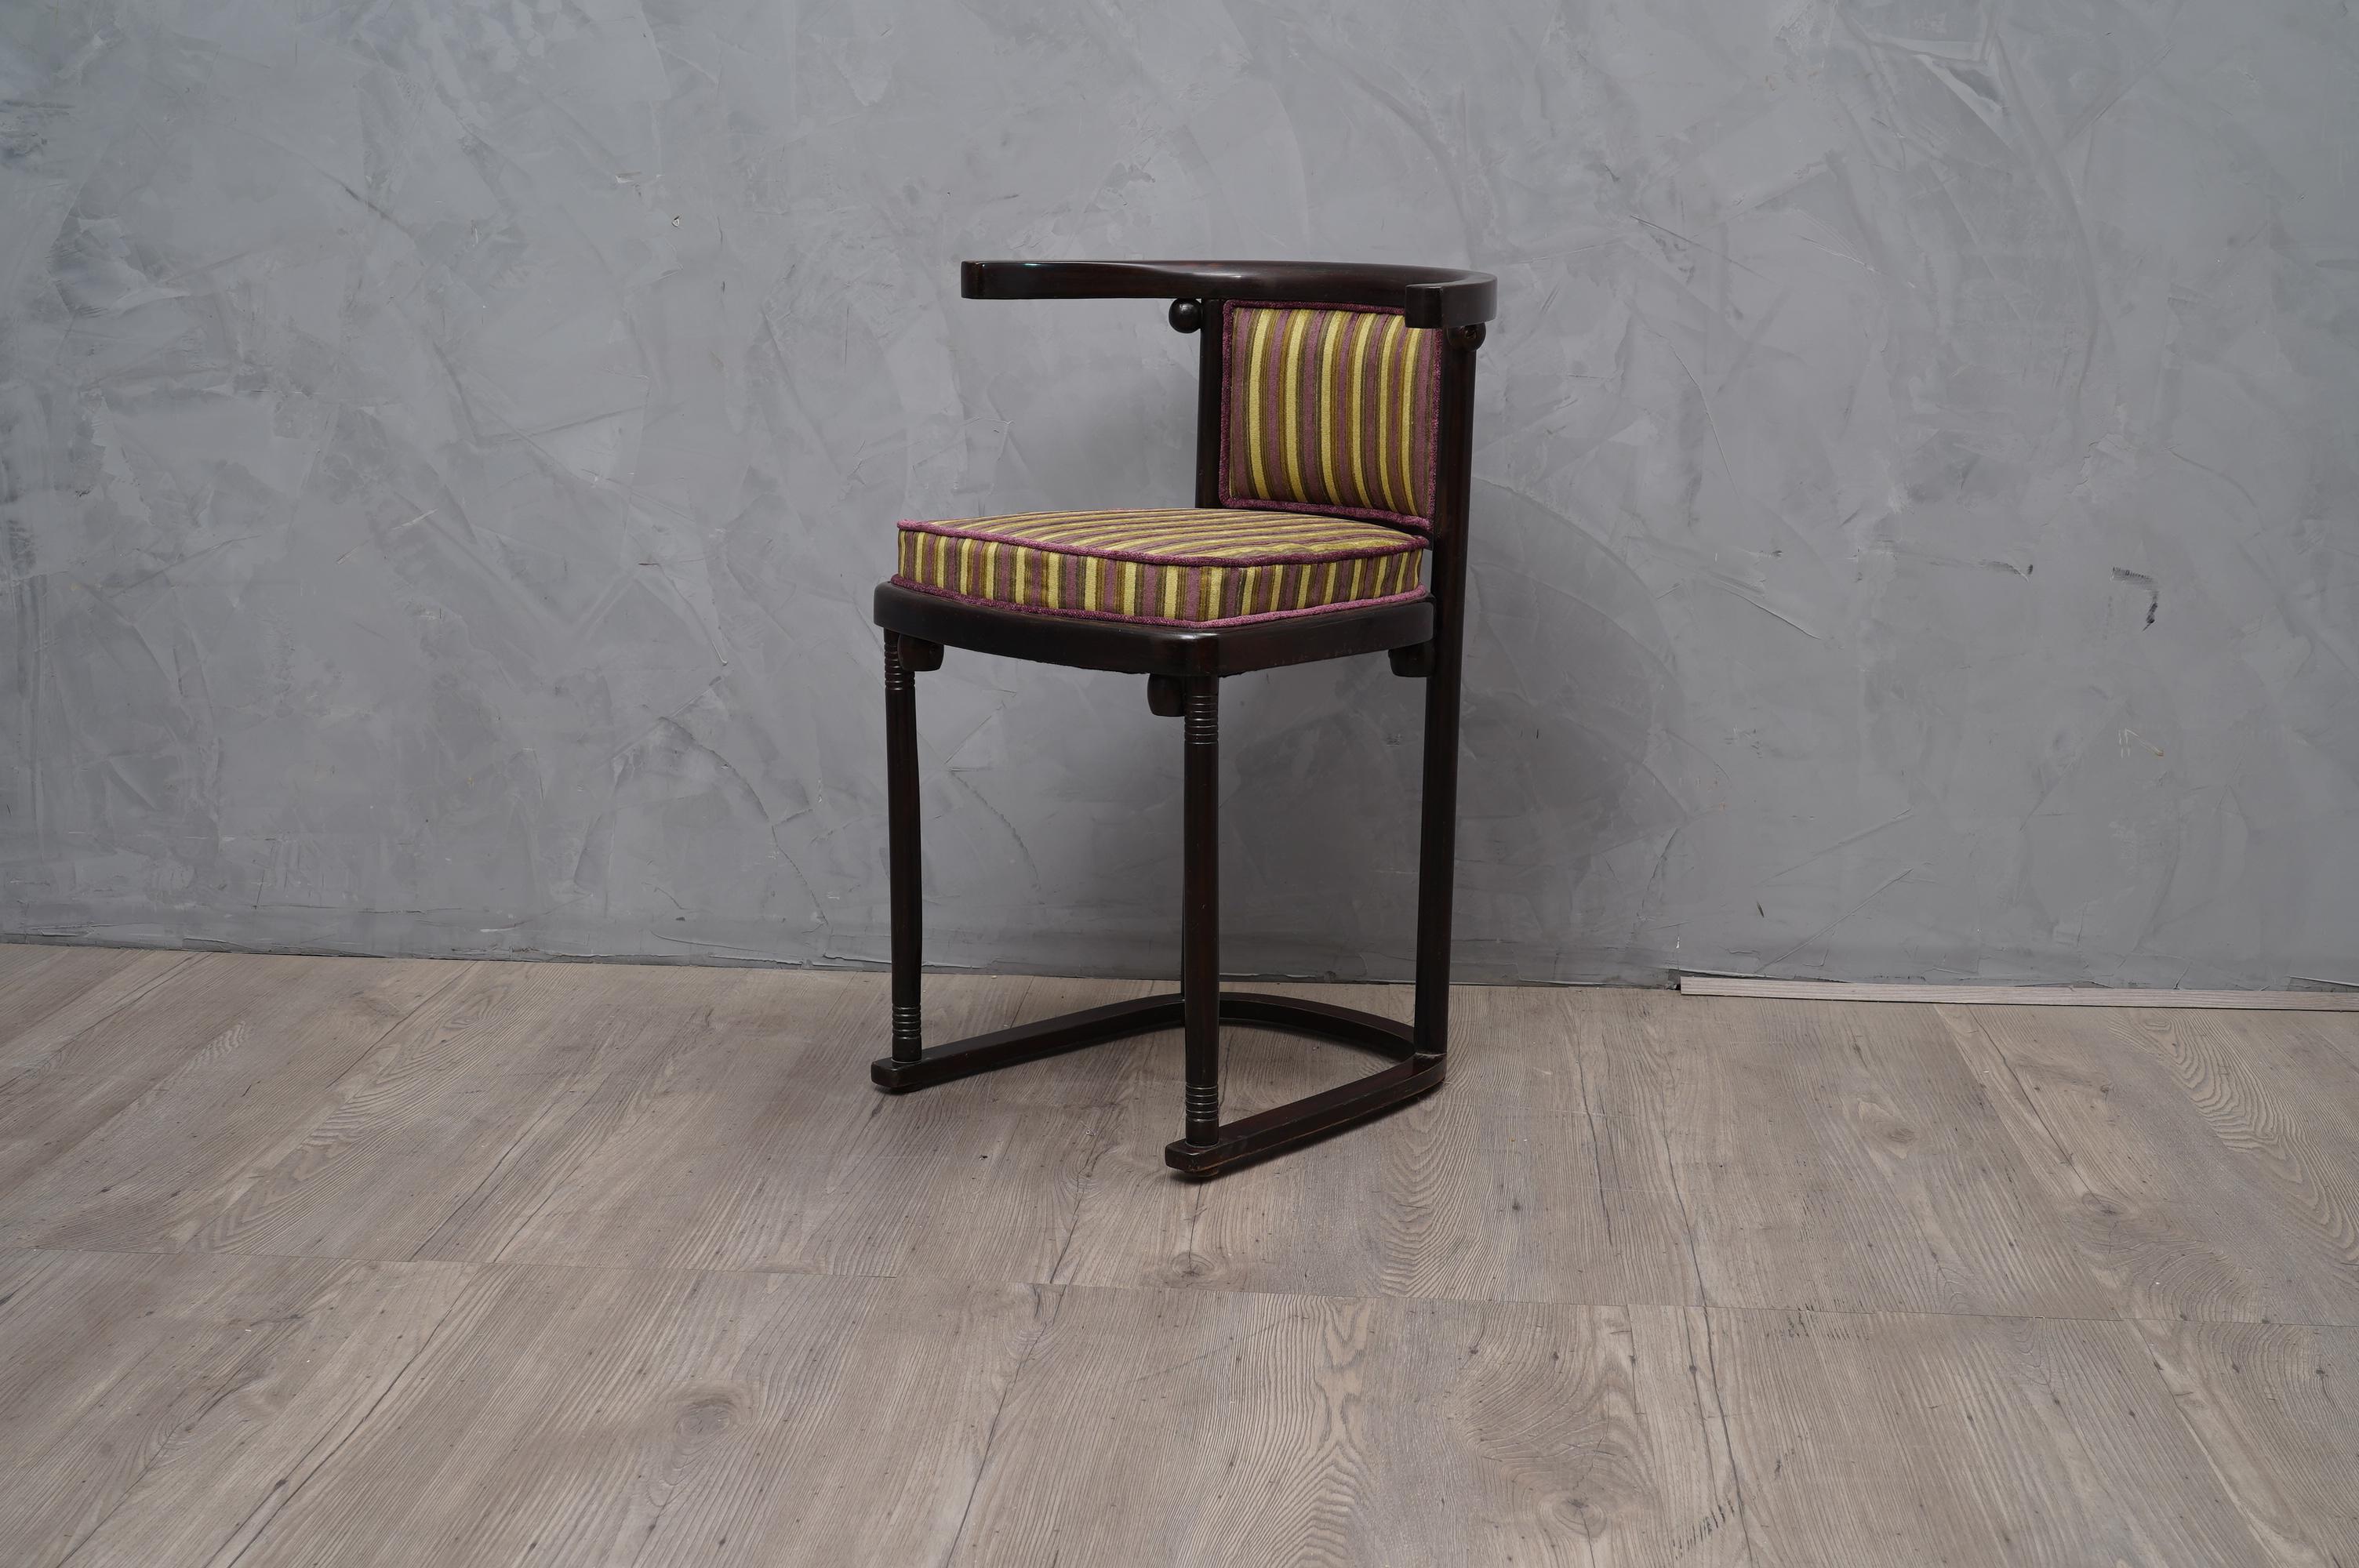 Very elegant appearance due the use of not common fabric, coming from particular Italian silk factory, this gentle upholstery gives these armchairs a very luxurious appearance.

The pair of chairs is entirely in curved beechwood, with particular